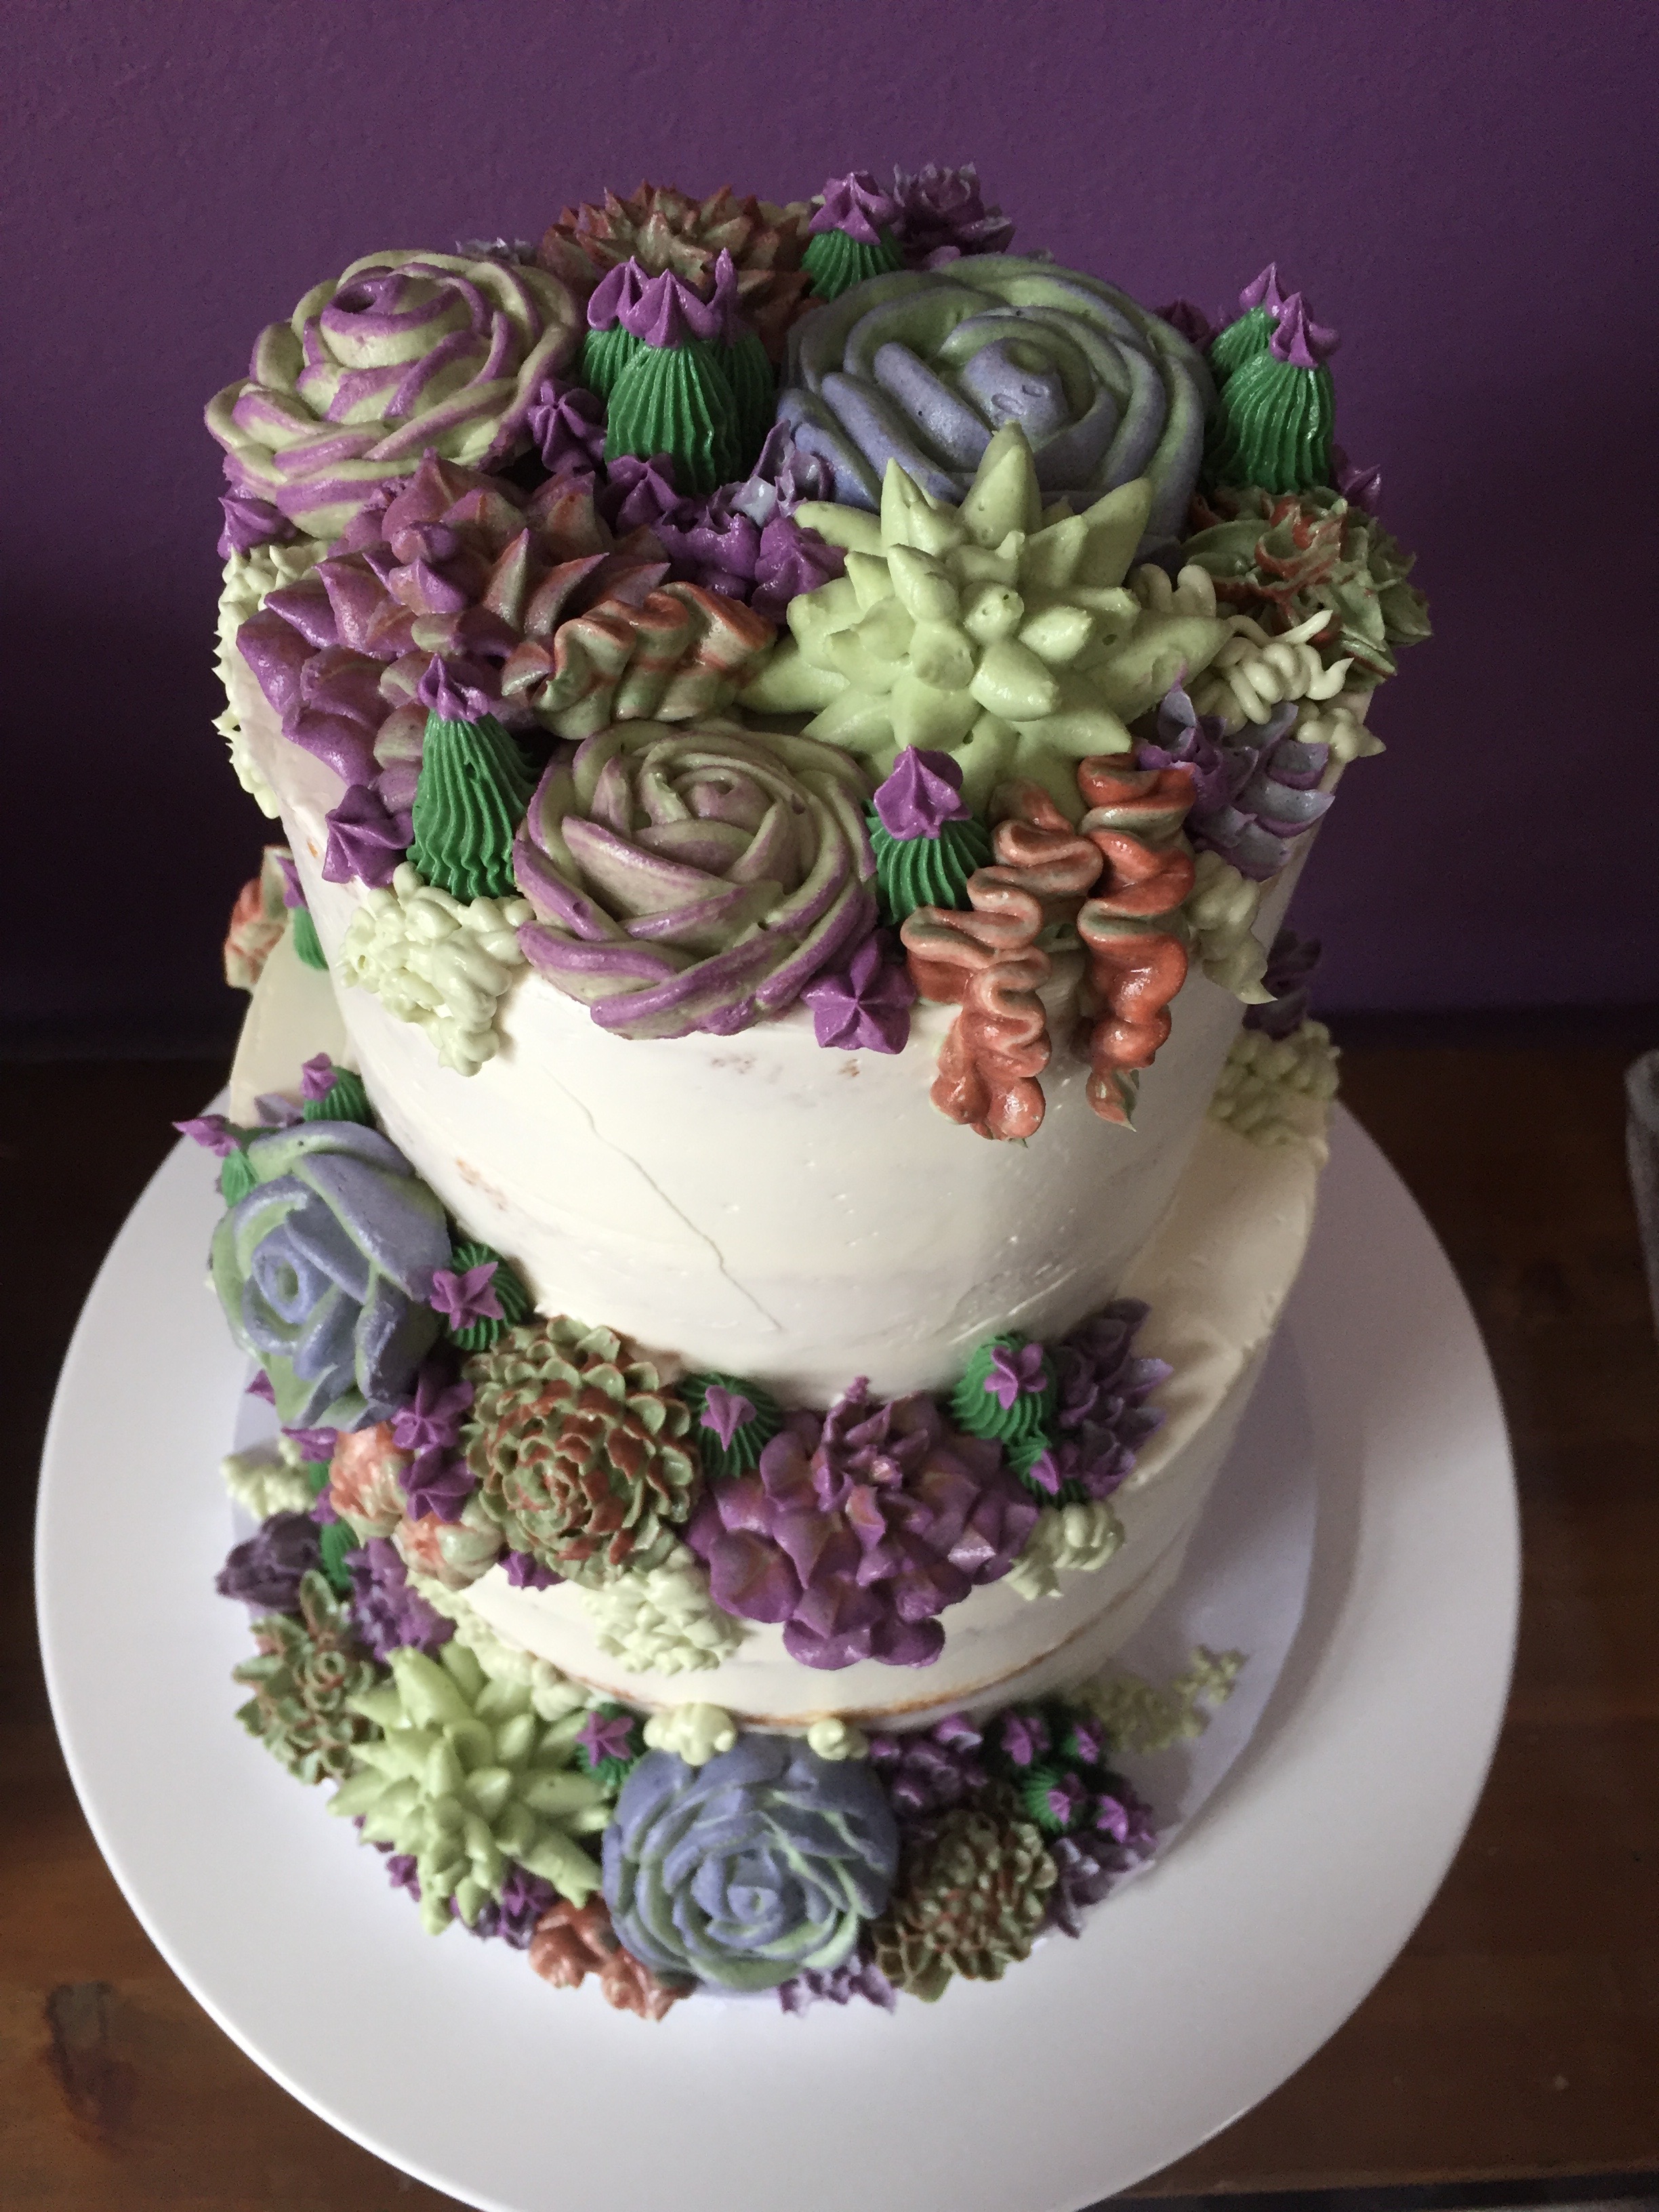 Two Tiered Succulent Cake - Amuse Bake Shop